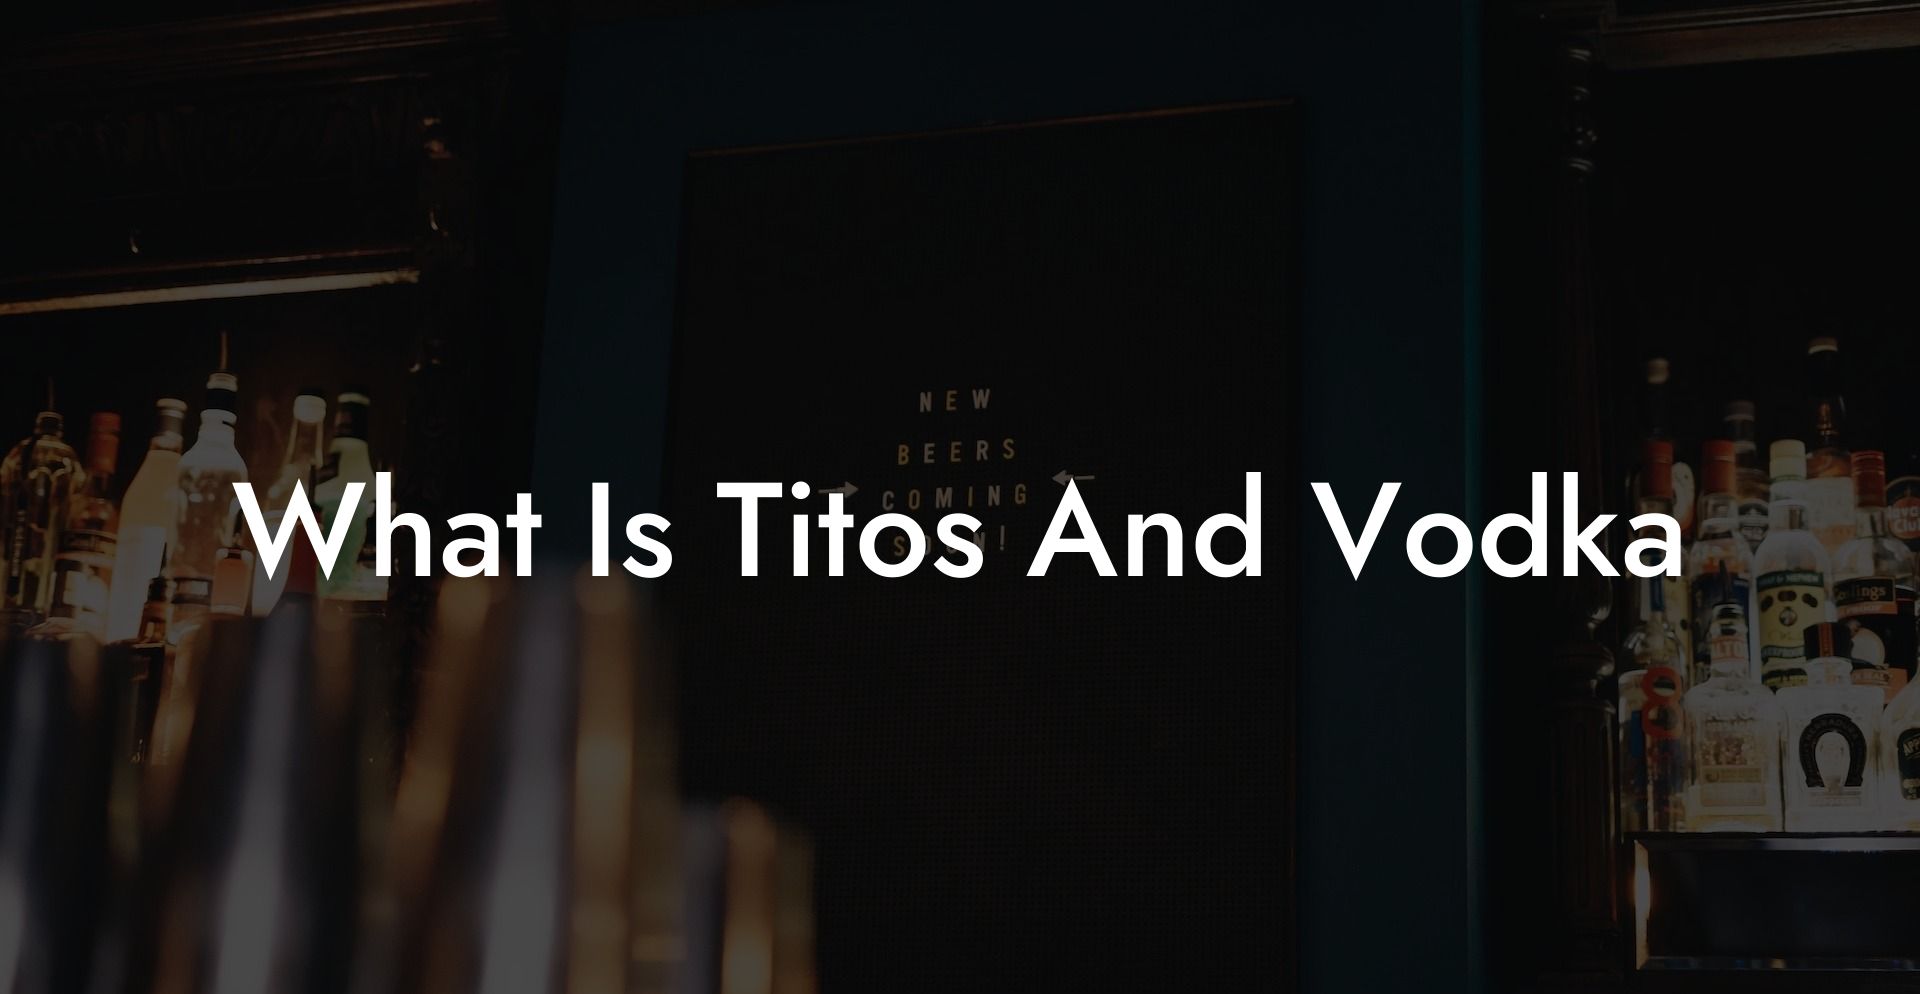 What Is Titos And Vodka